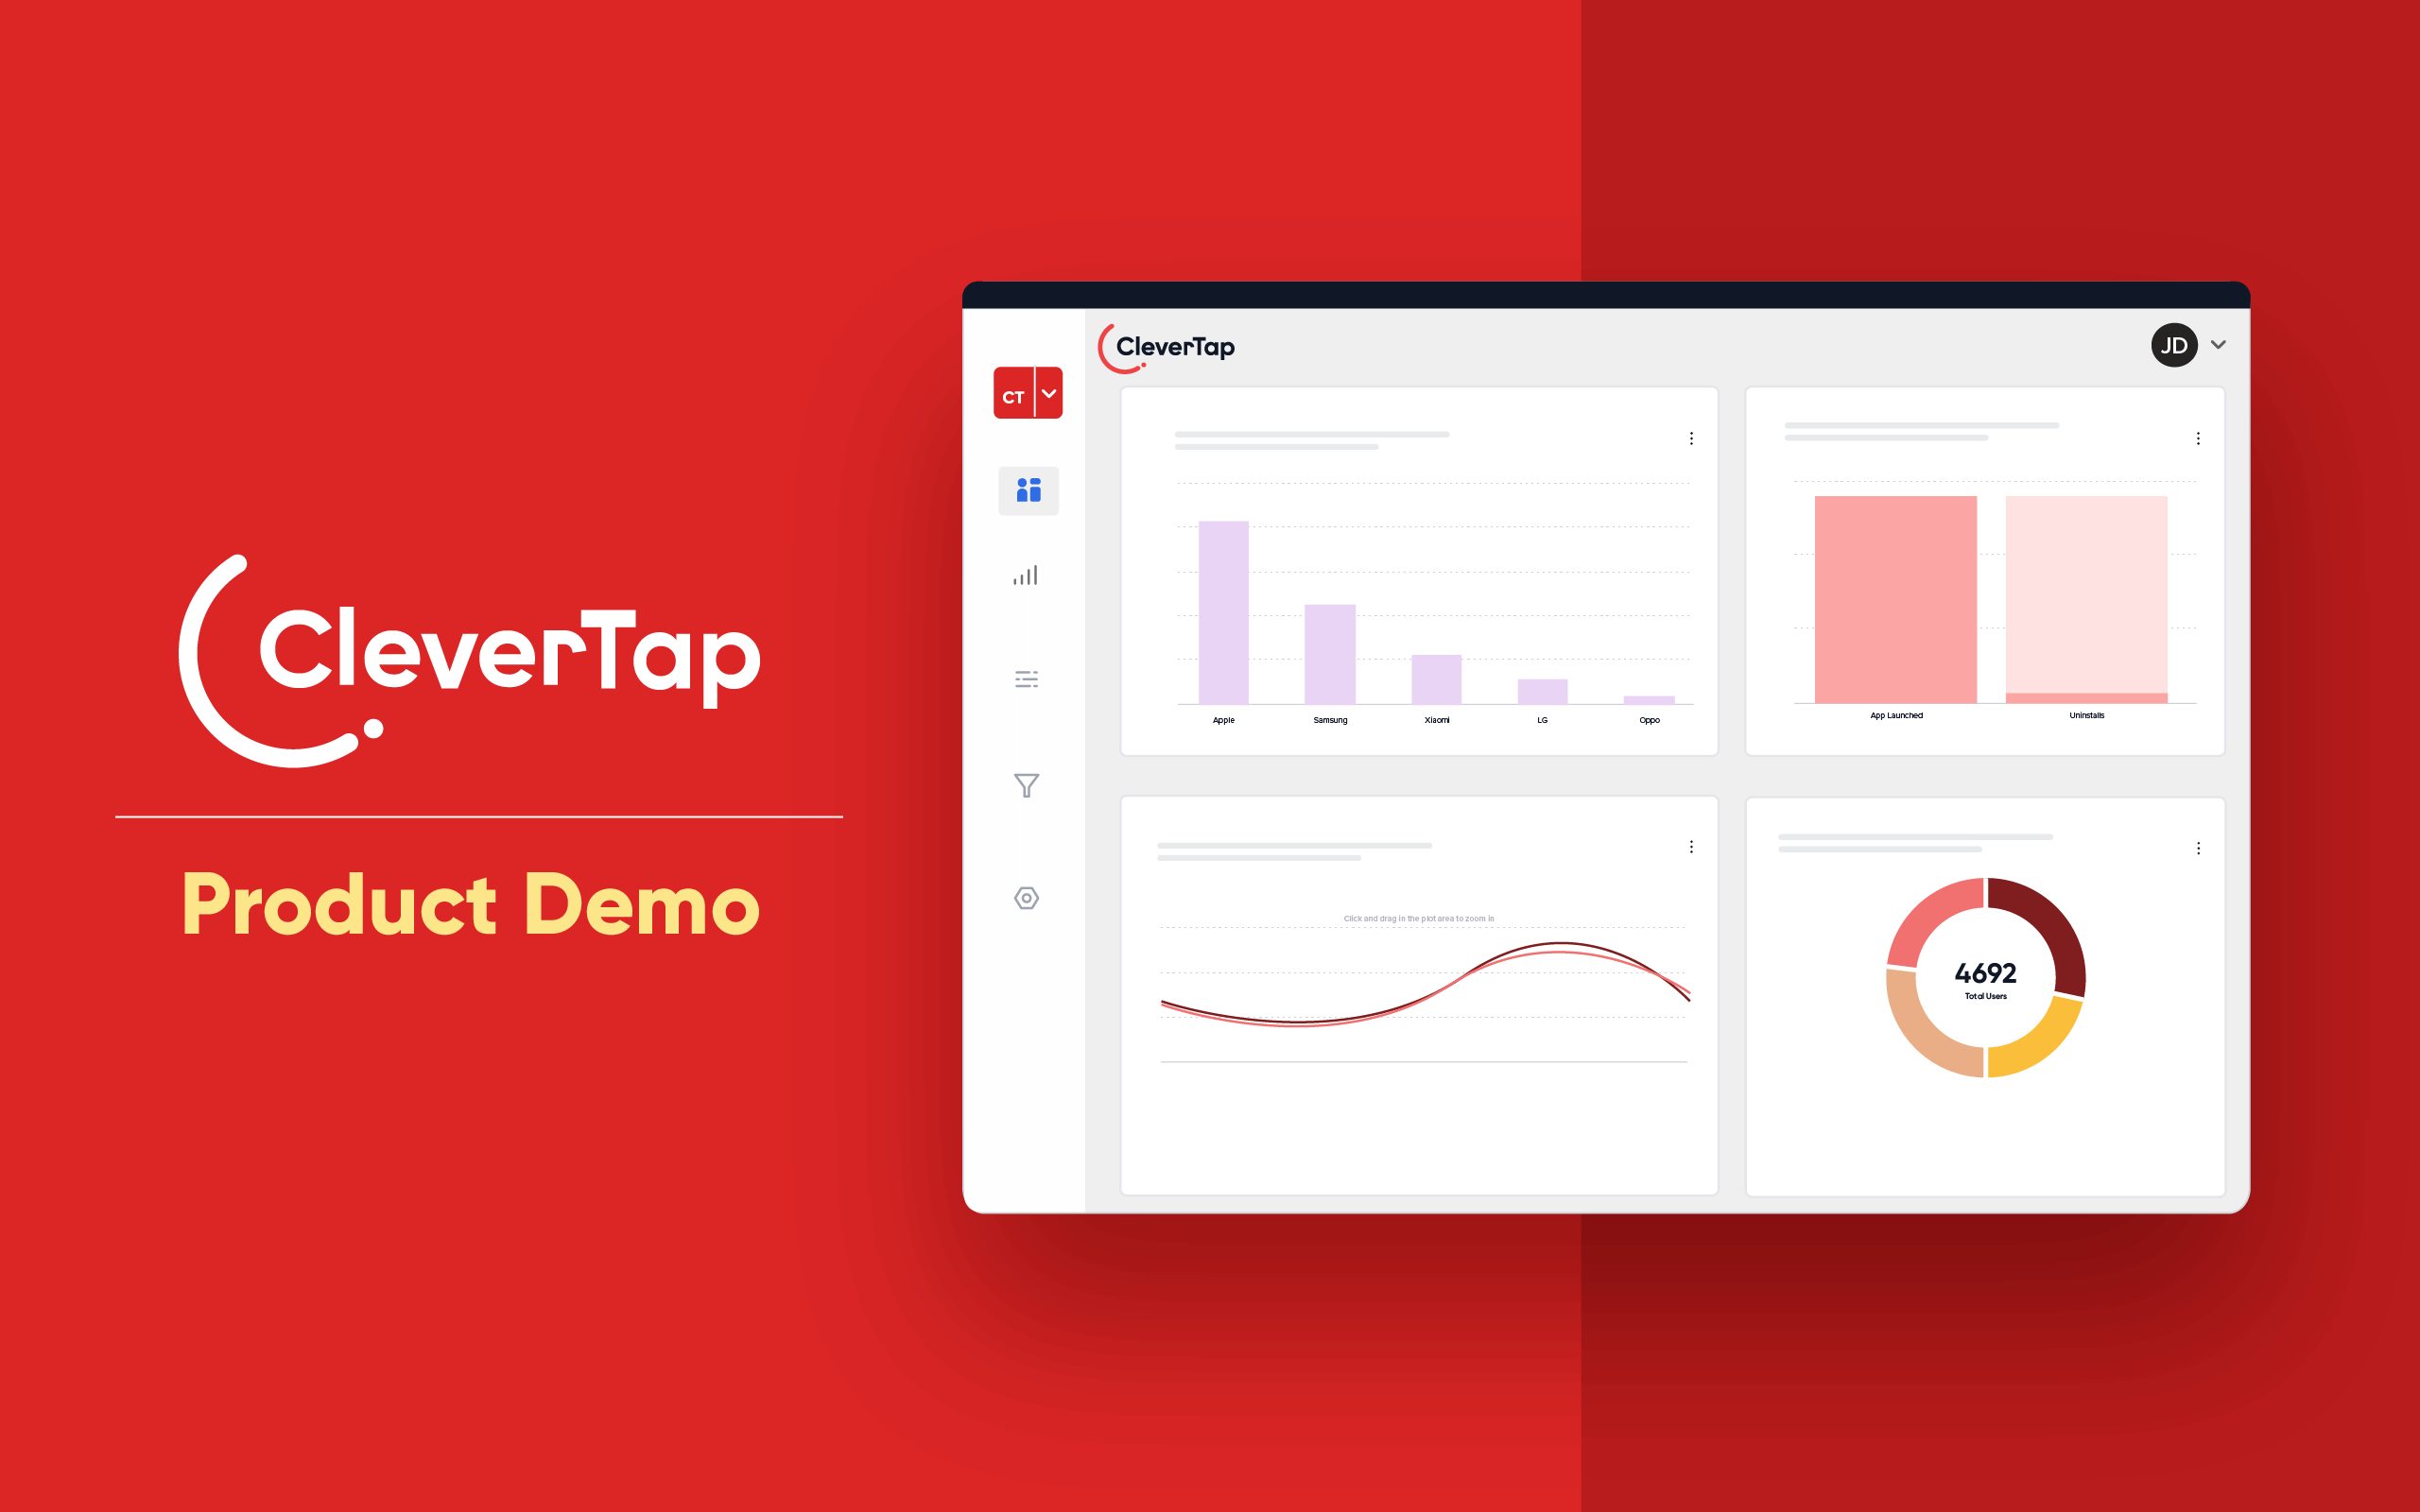 Getting Started with CleverTap